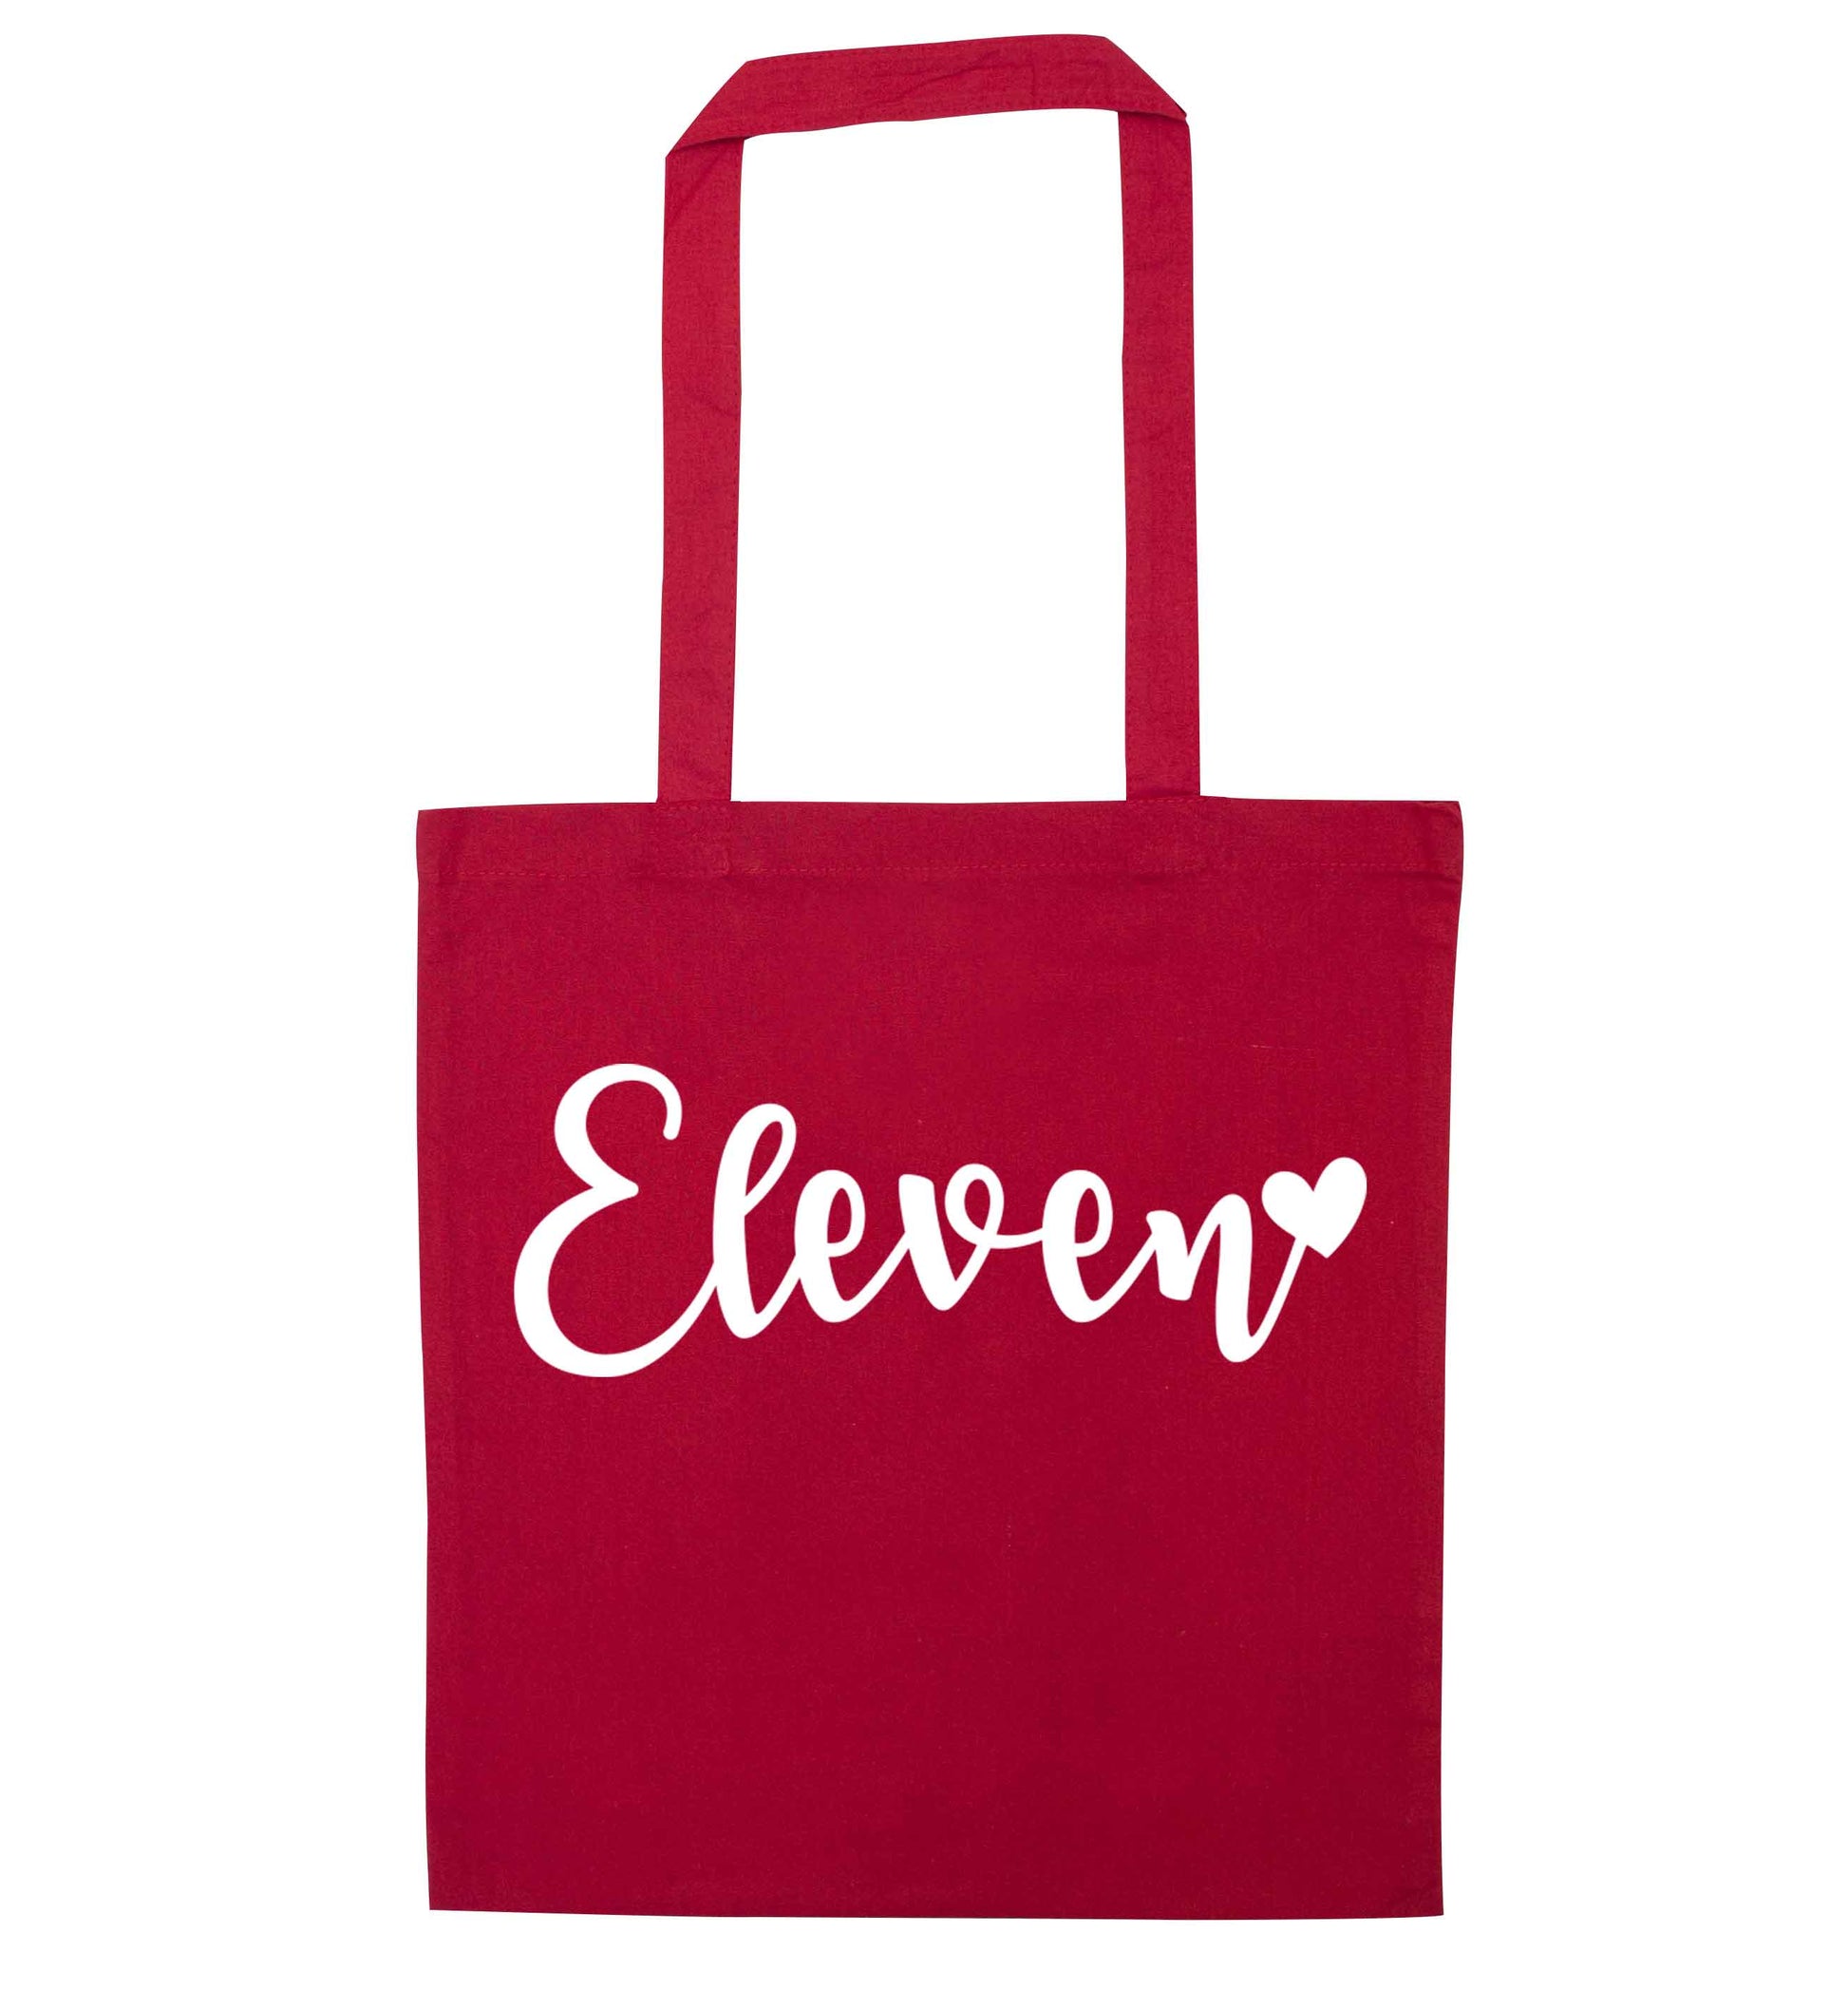 Eleven and heart! red tote bag